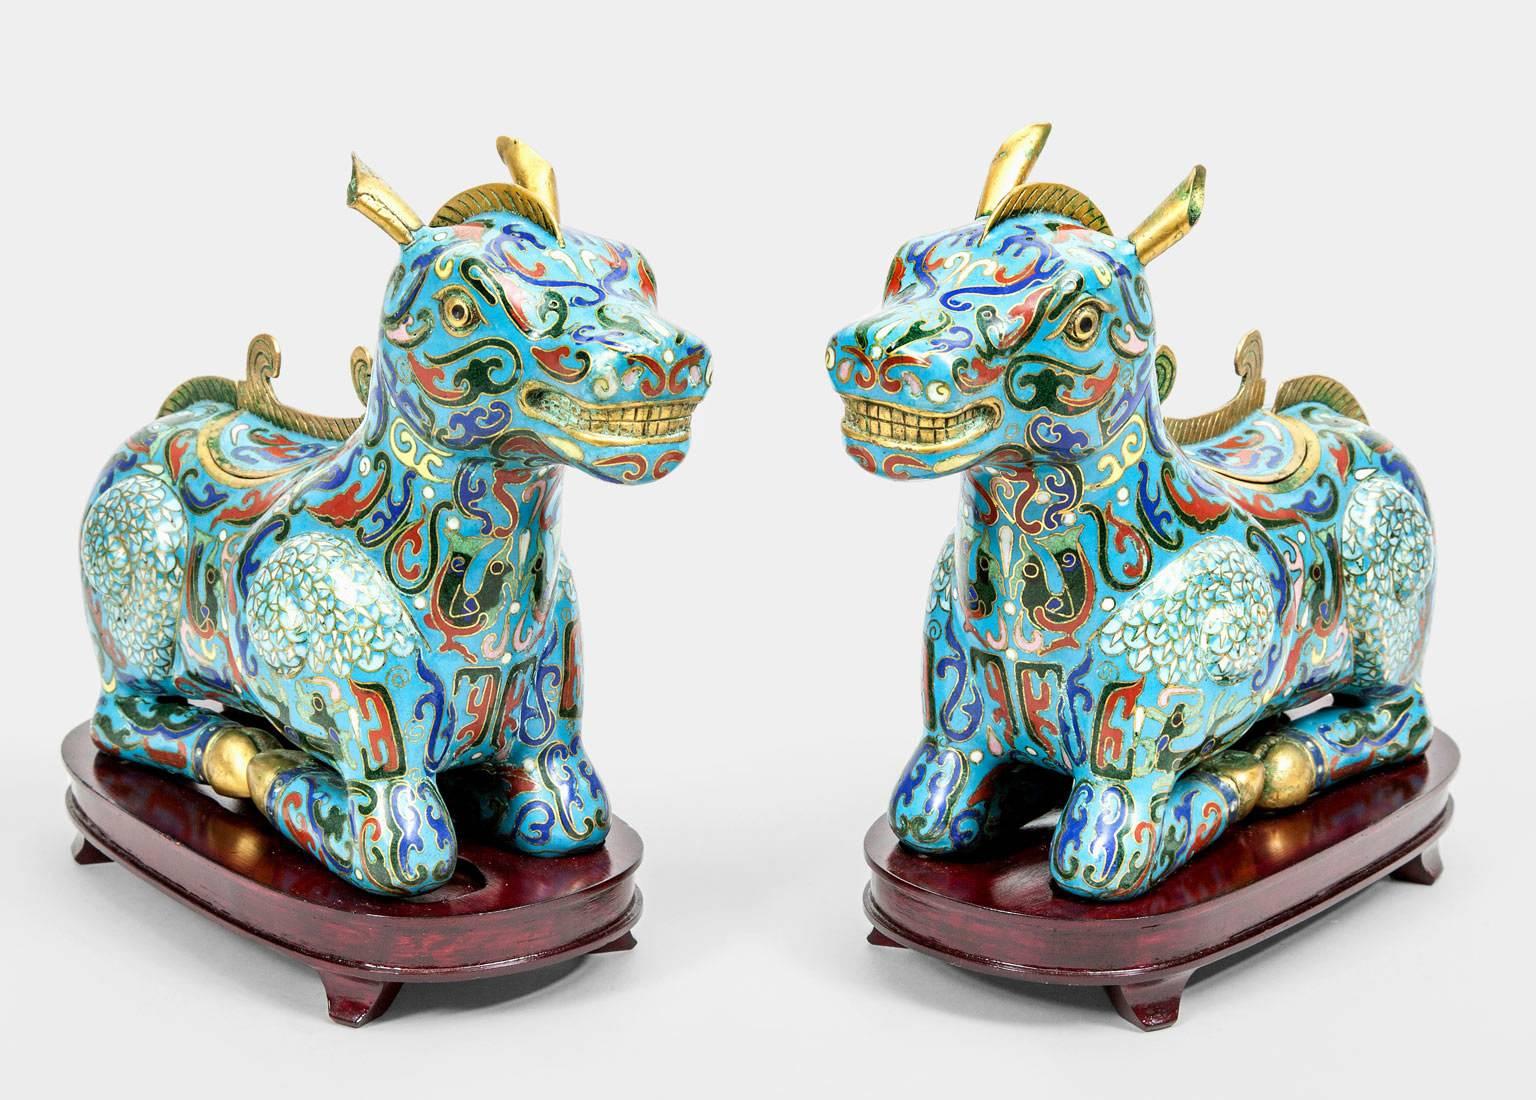 A whimsical pair of antique Chinese cloisonné incense burners in the form of kneeling horses on wooden stands, with removable lids, in enamel colors of turquoise, red, cobalt blue, green, yellows and white with gilded mane, ears, eyes, teeth and